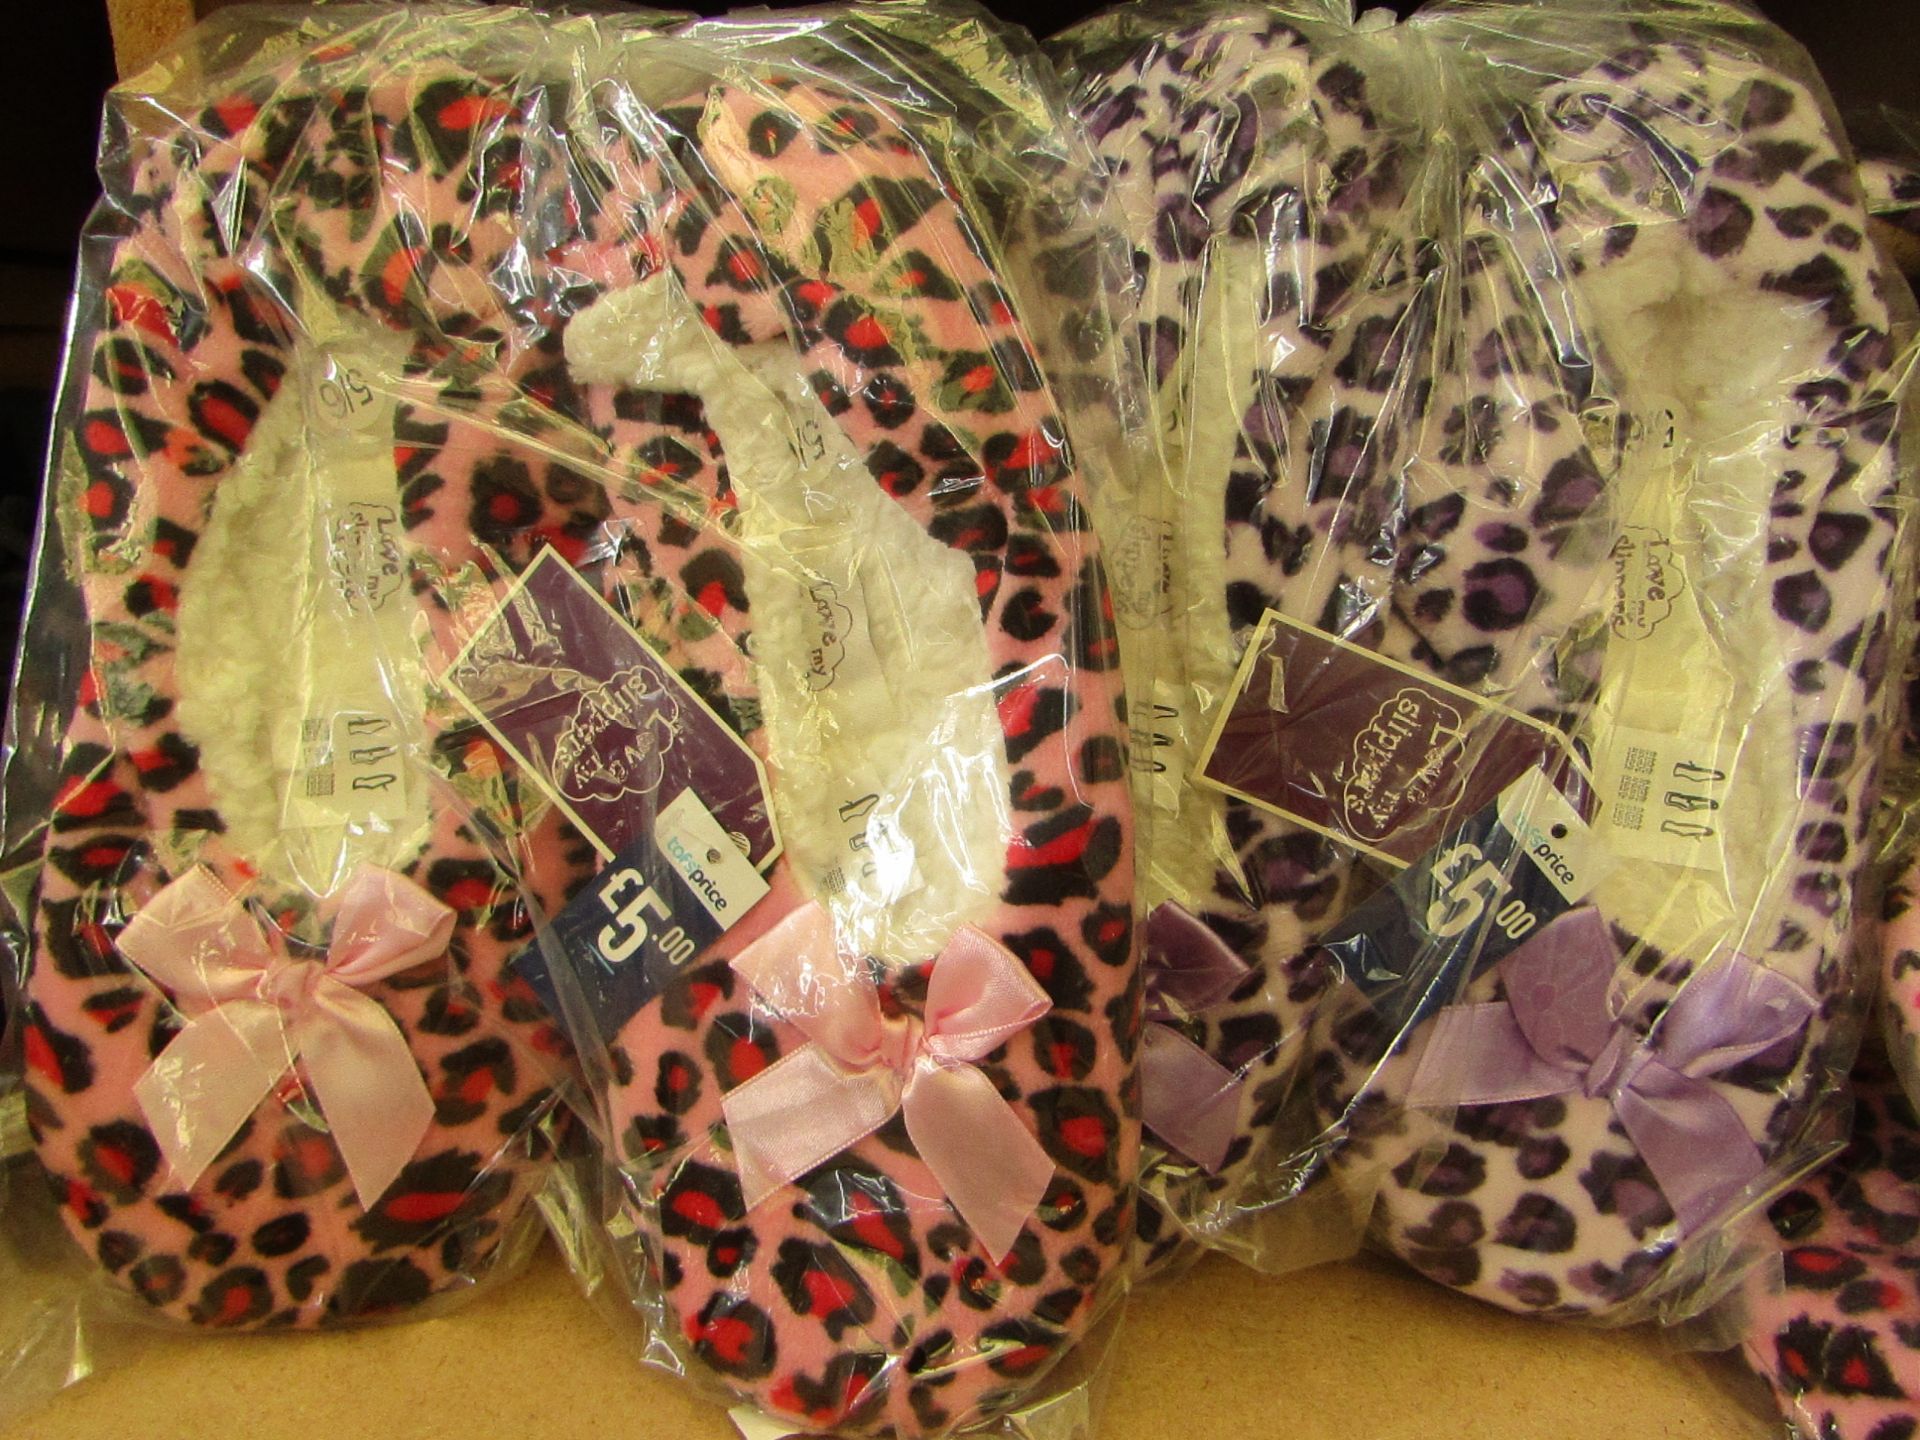 2 x pairs of Love My Slippers (1 x Purple & 1 x Pink) size 5/6 new & packaged